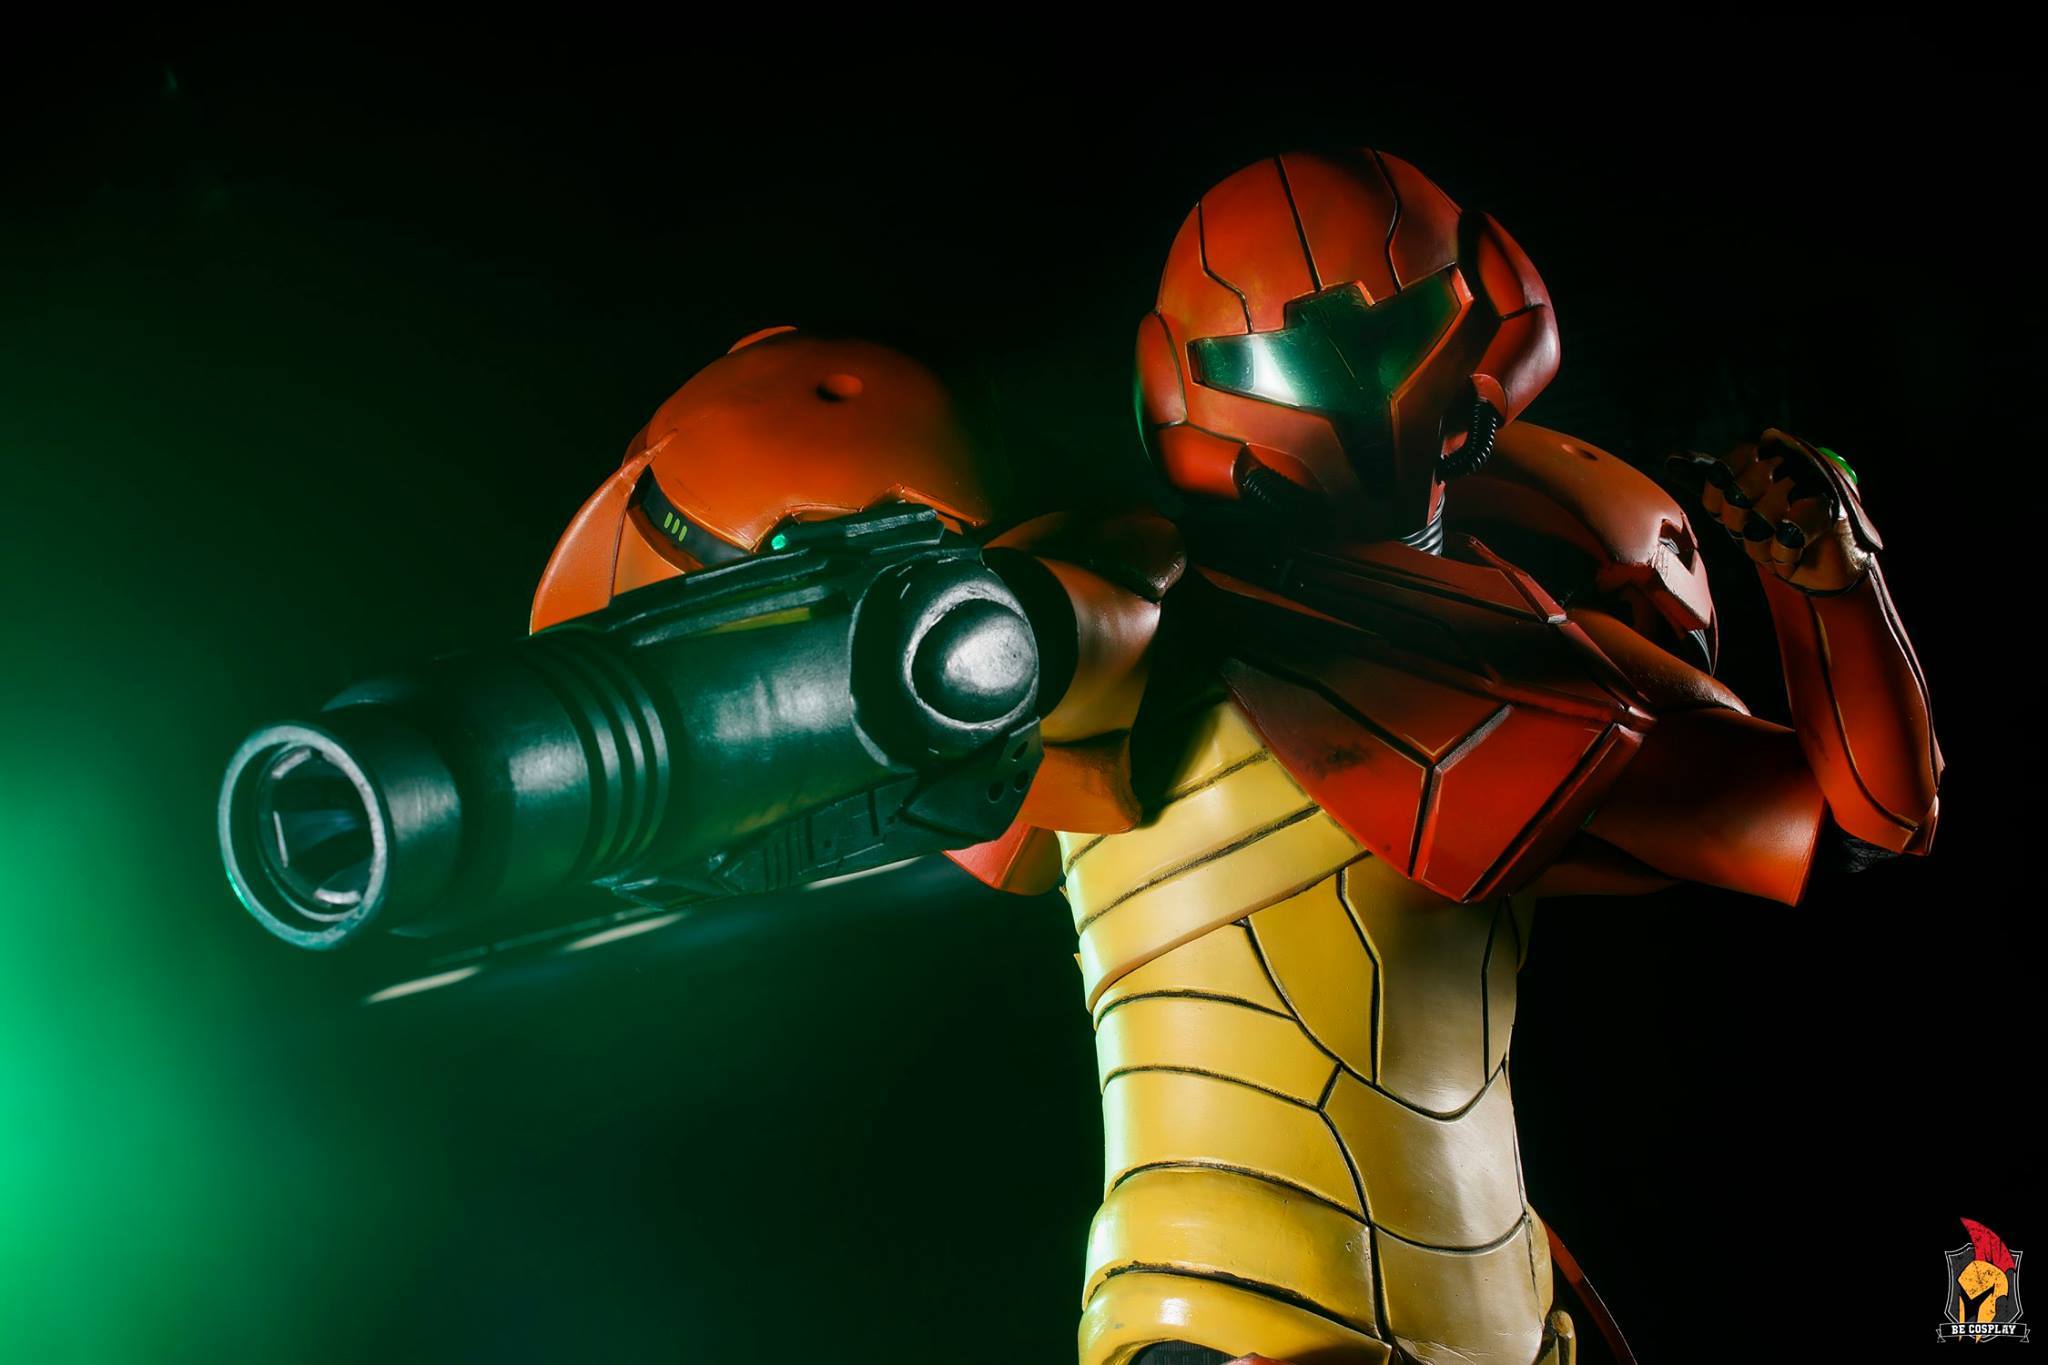 Some A+ Metroid Cosplay